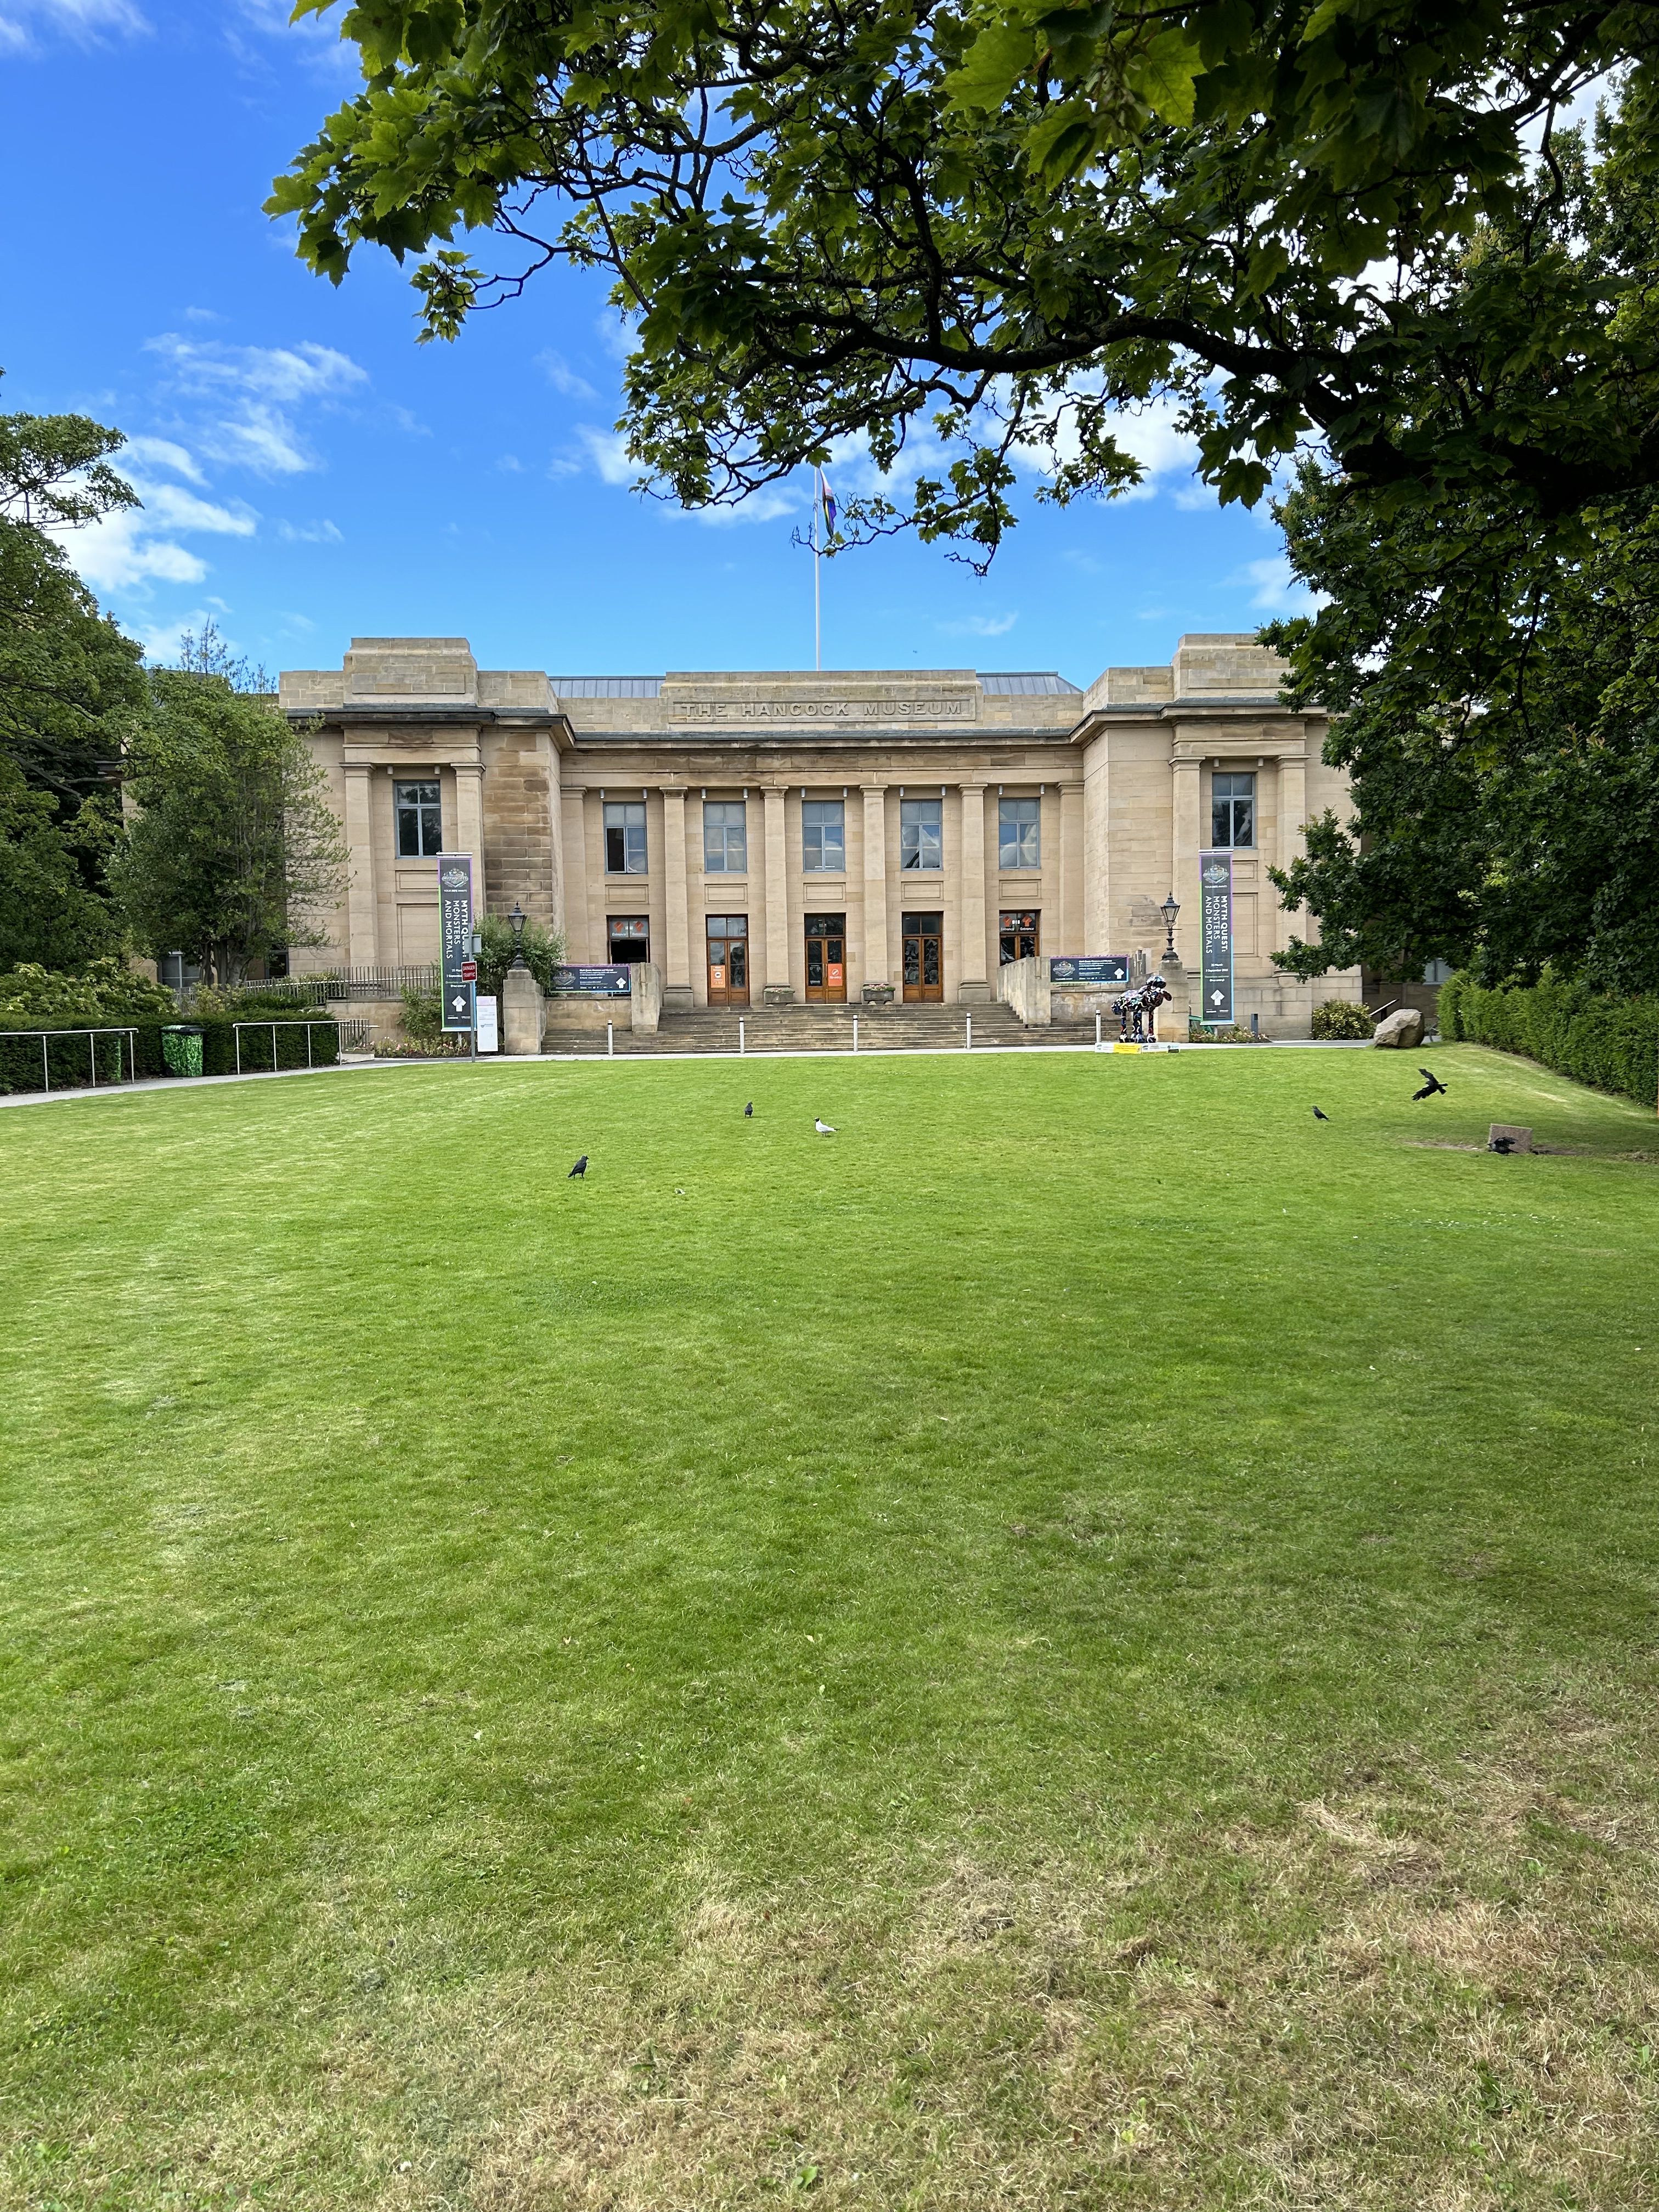 A large lawn with trees and a building with a flag on it.